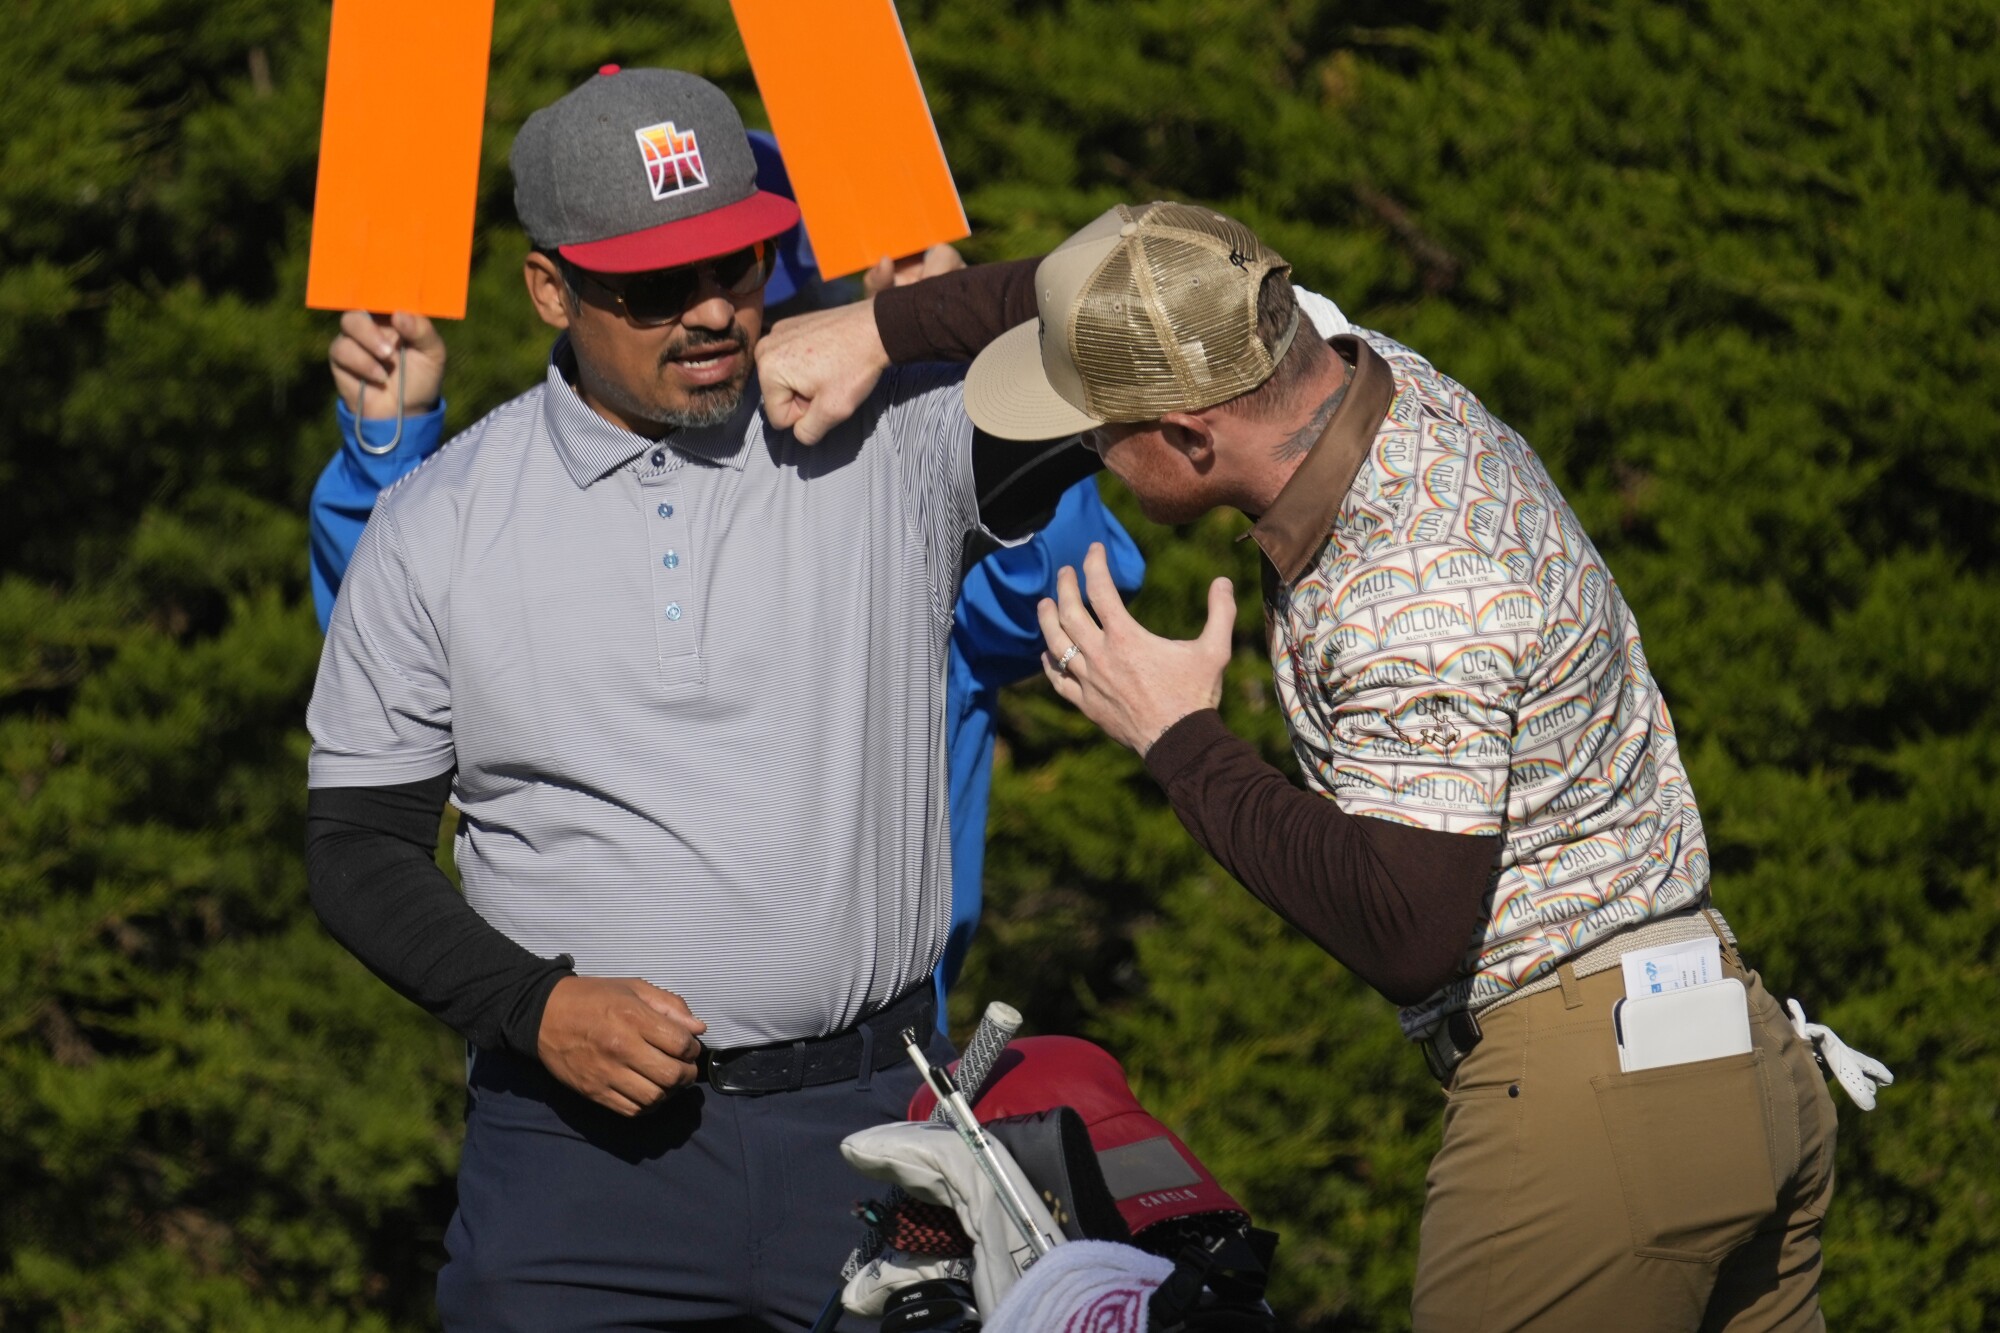 Canelo Alvarez, right, shows off a punch to actor Michael Pena during the Pebble Beach Pro-Am in February.